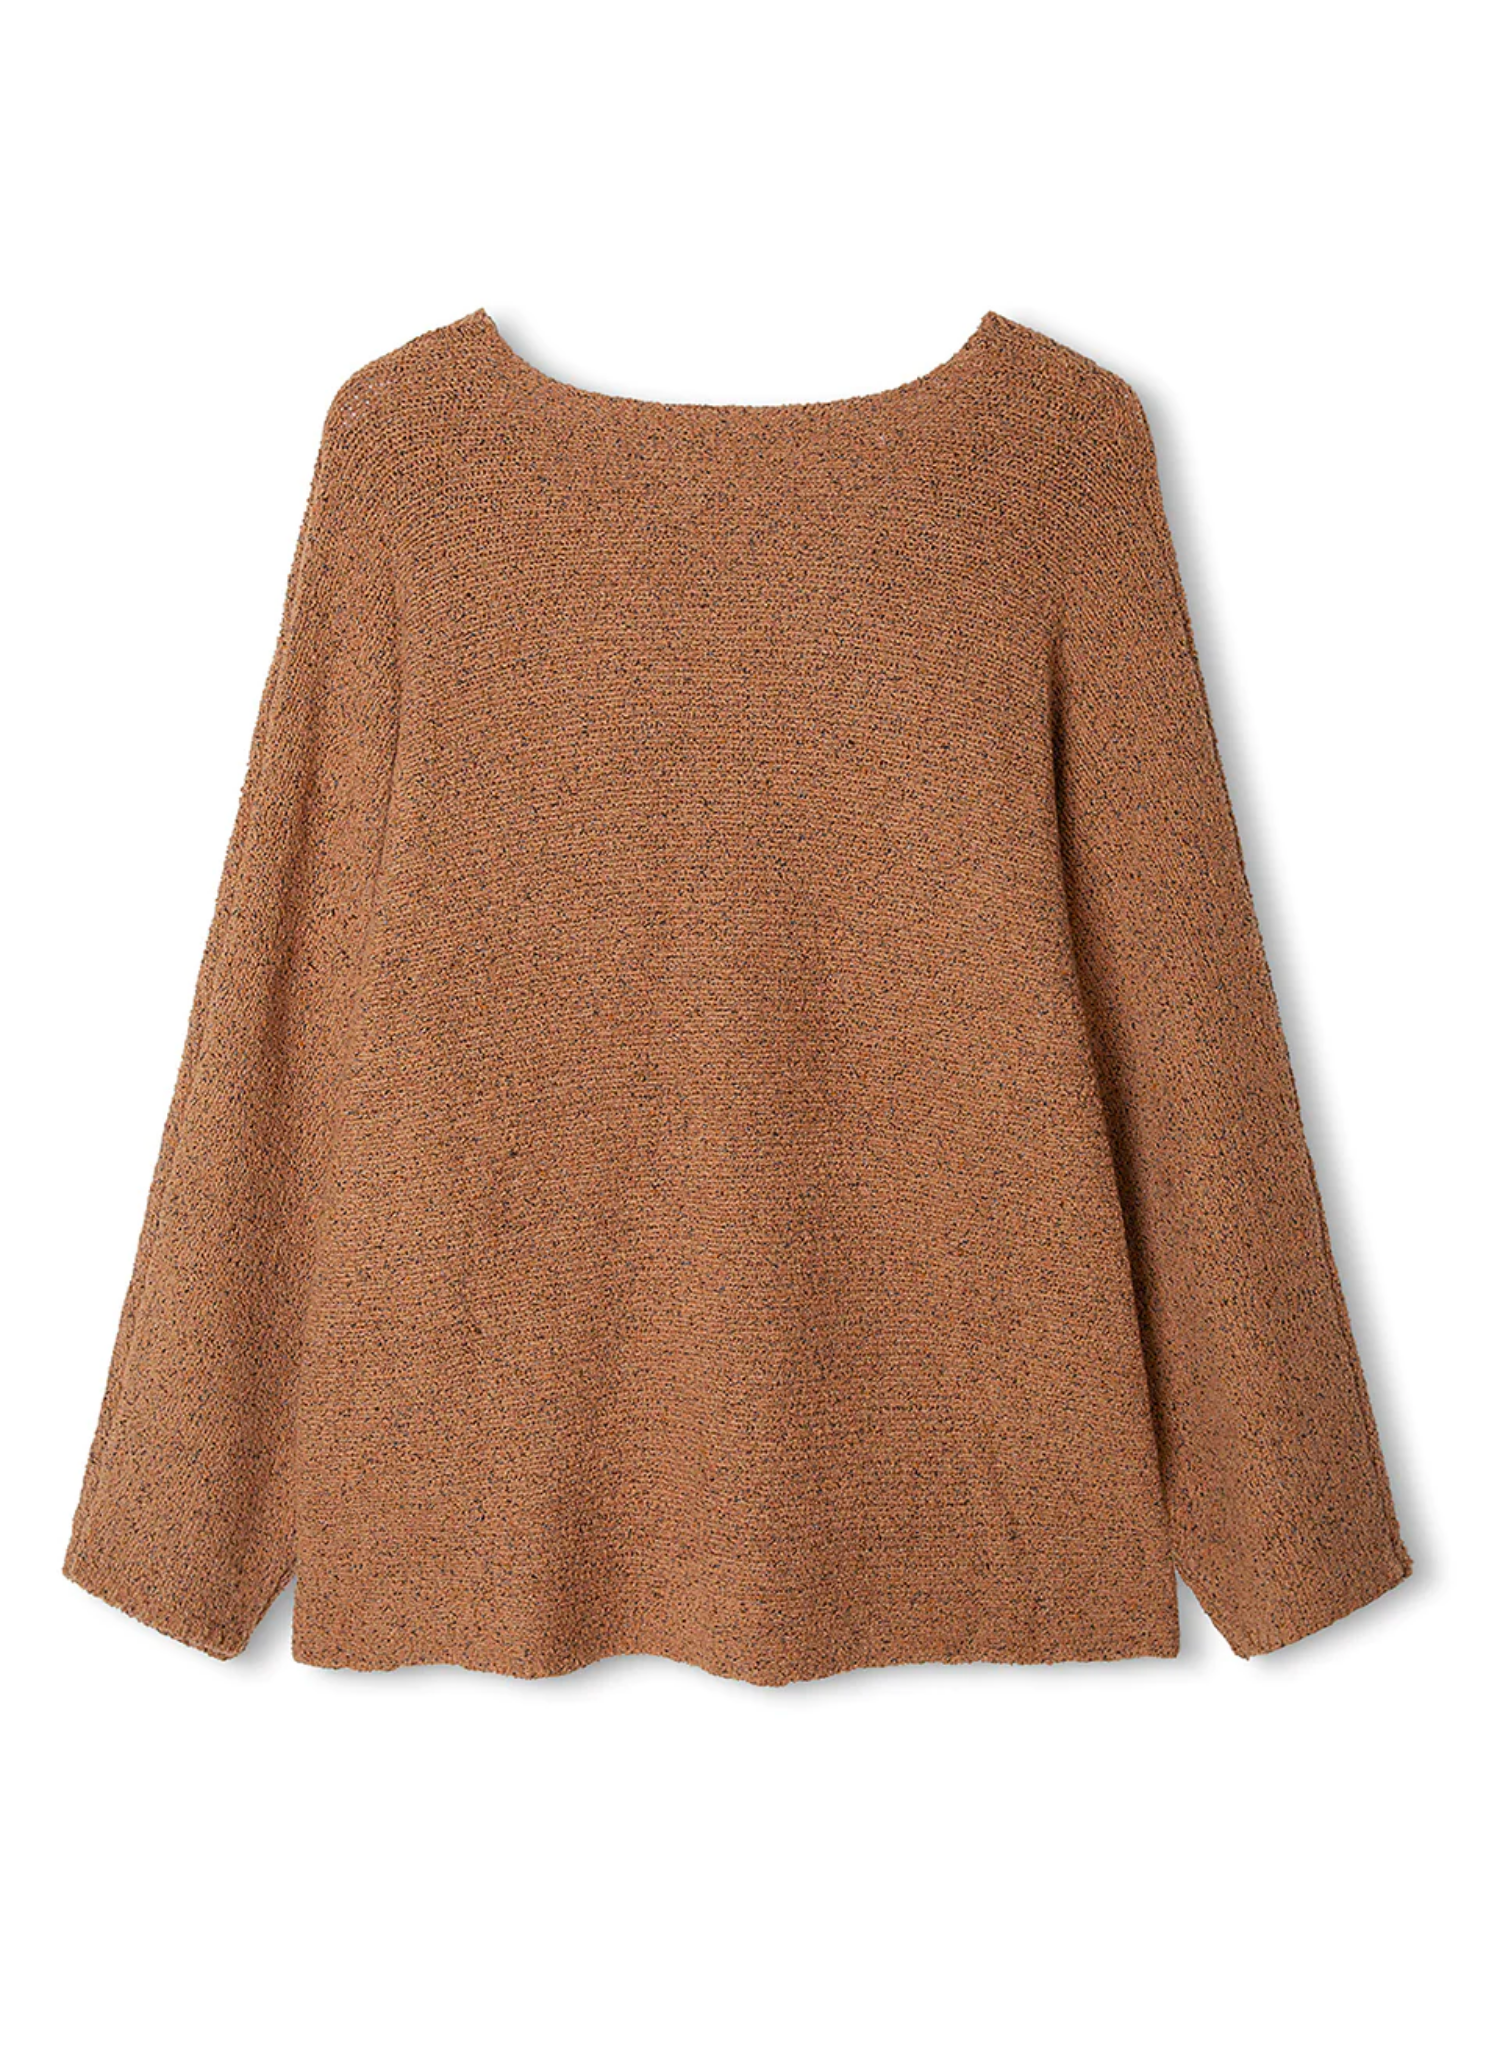 The Almond Cotton Blend Knit Jumper by Zulu & Zephyr has a relaxed fit, longer length sleeve, and V neckline, in a multi tonal yarn of rich almond brown with grey and black flecks. In a light to mid-weight drapey knit with raw look hem detailing, this may be paired with your favourite skirt or shorts for a transeasonal look.